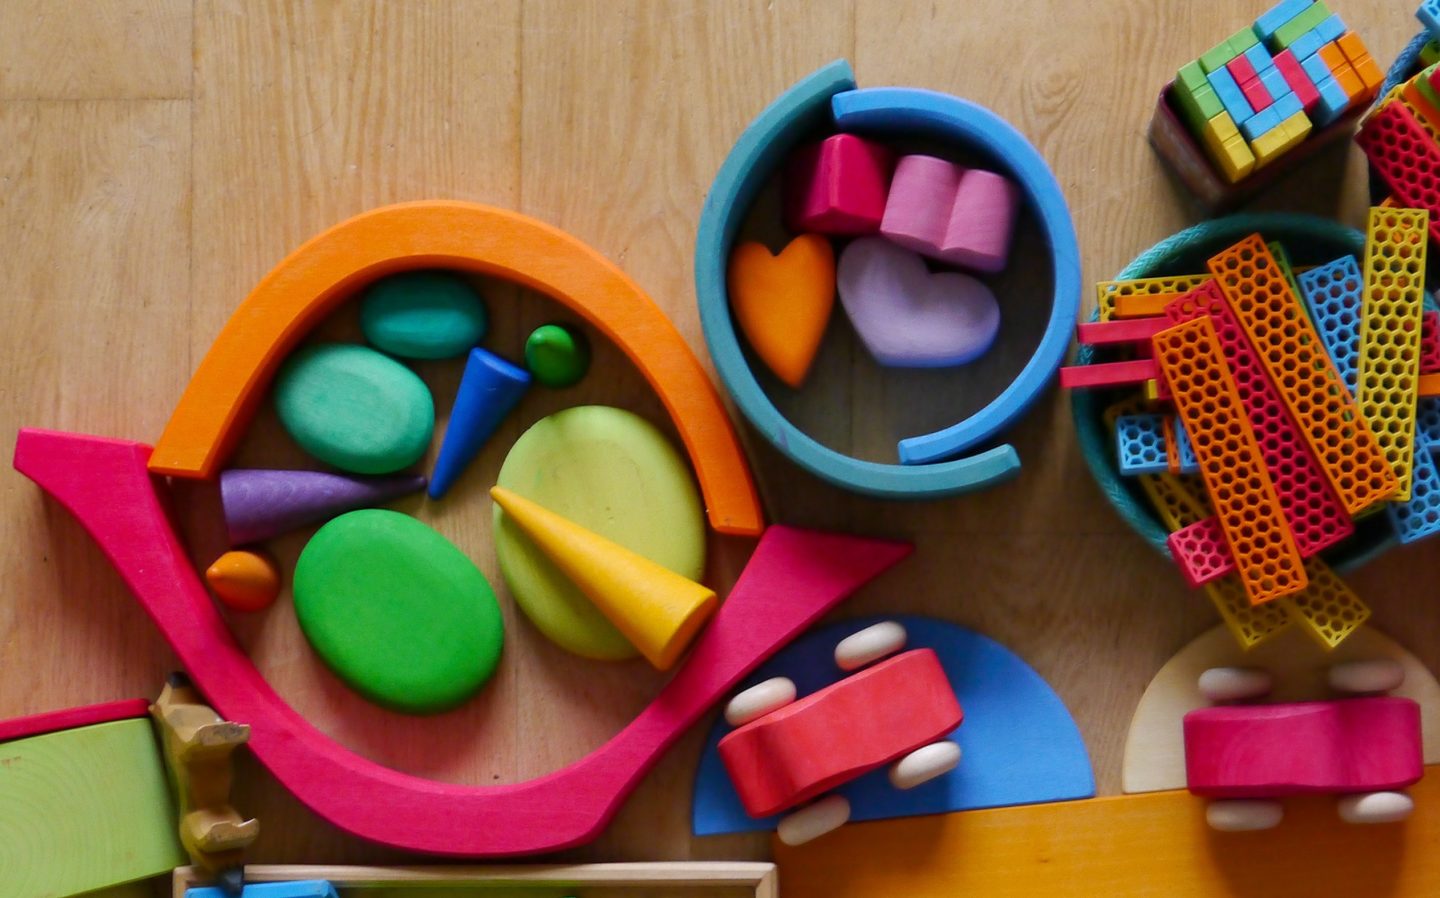 Wooden toys and open ended toys are a great plastic free swap for families